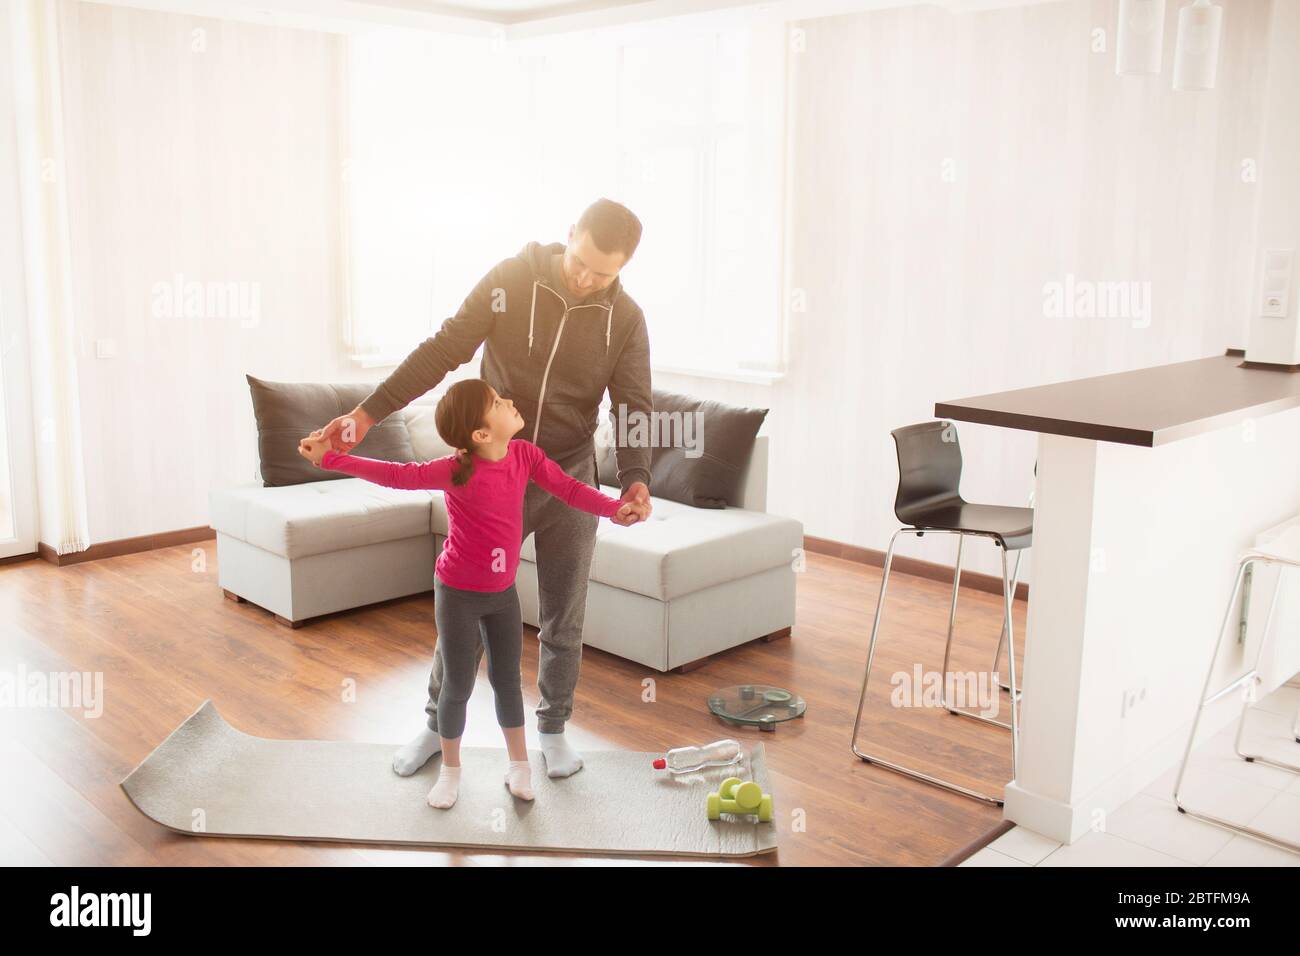 father and daughter are training at home. Workout in the apartment. Sports at home. They are standing on a yoga mat Stock Photo